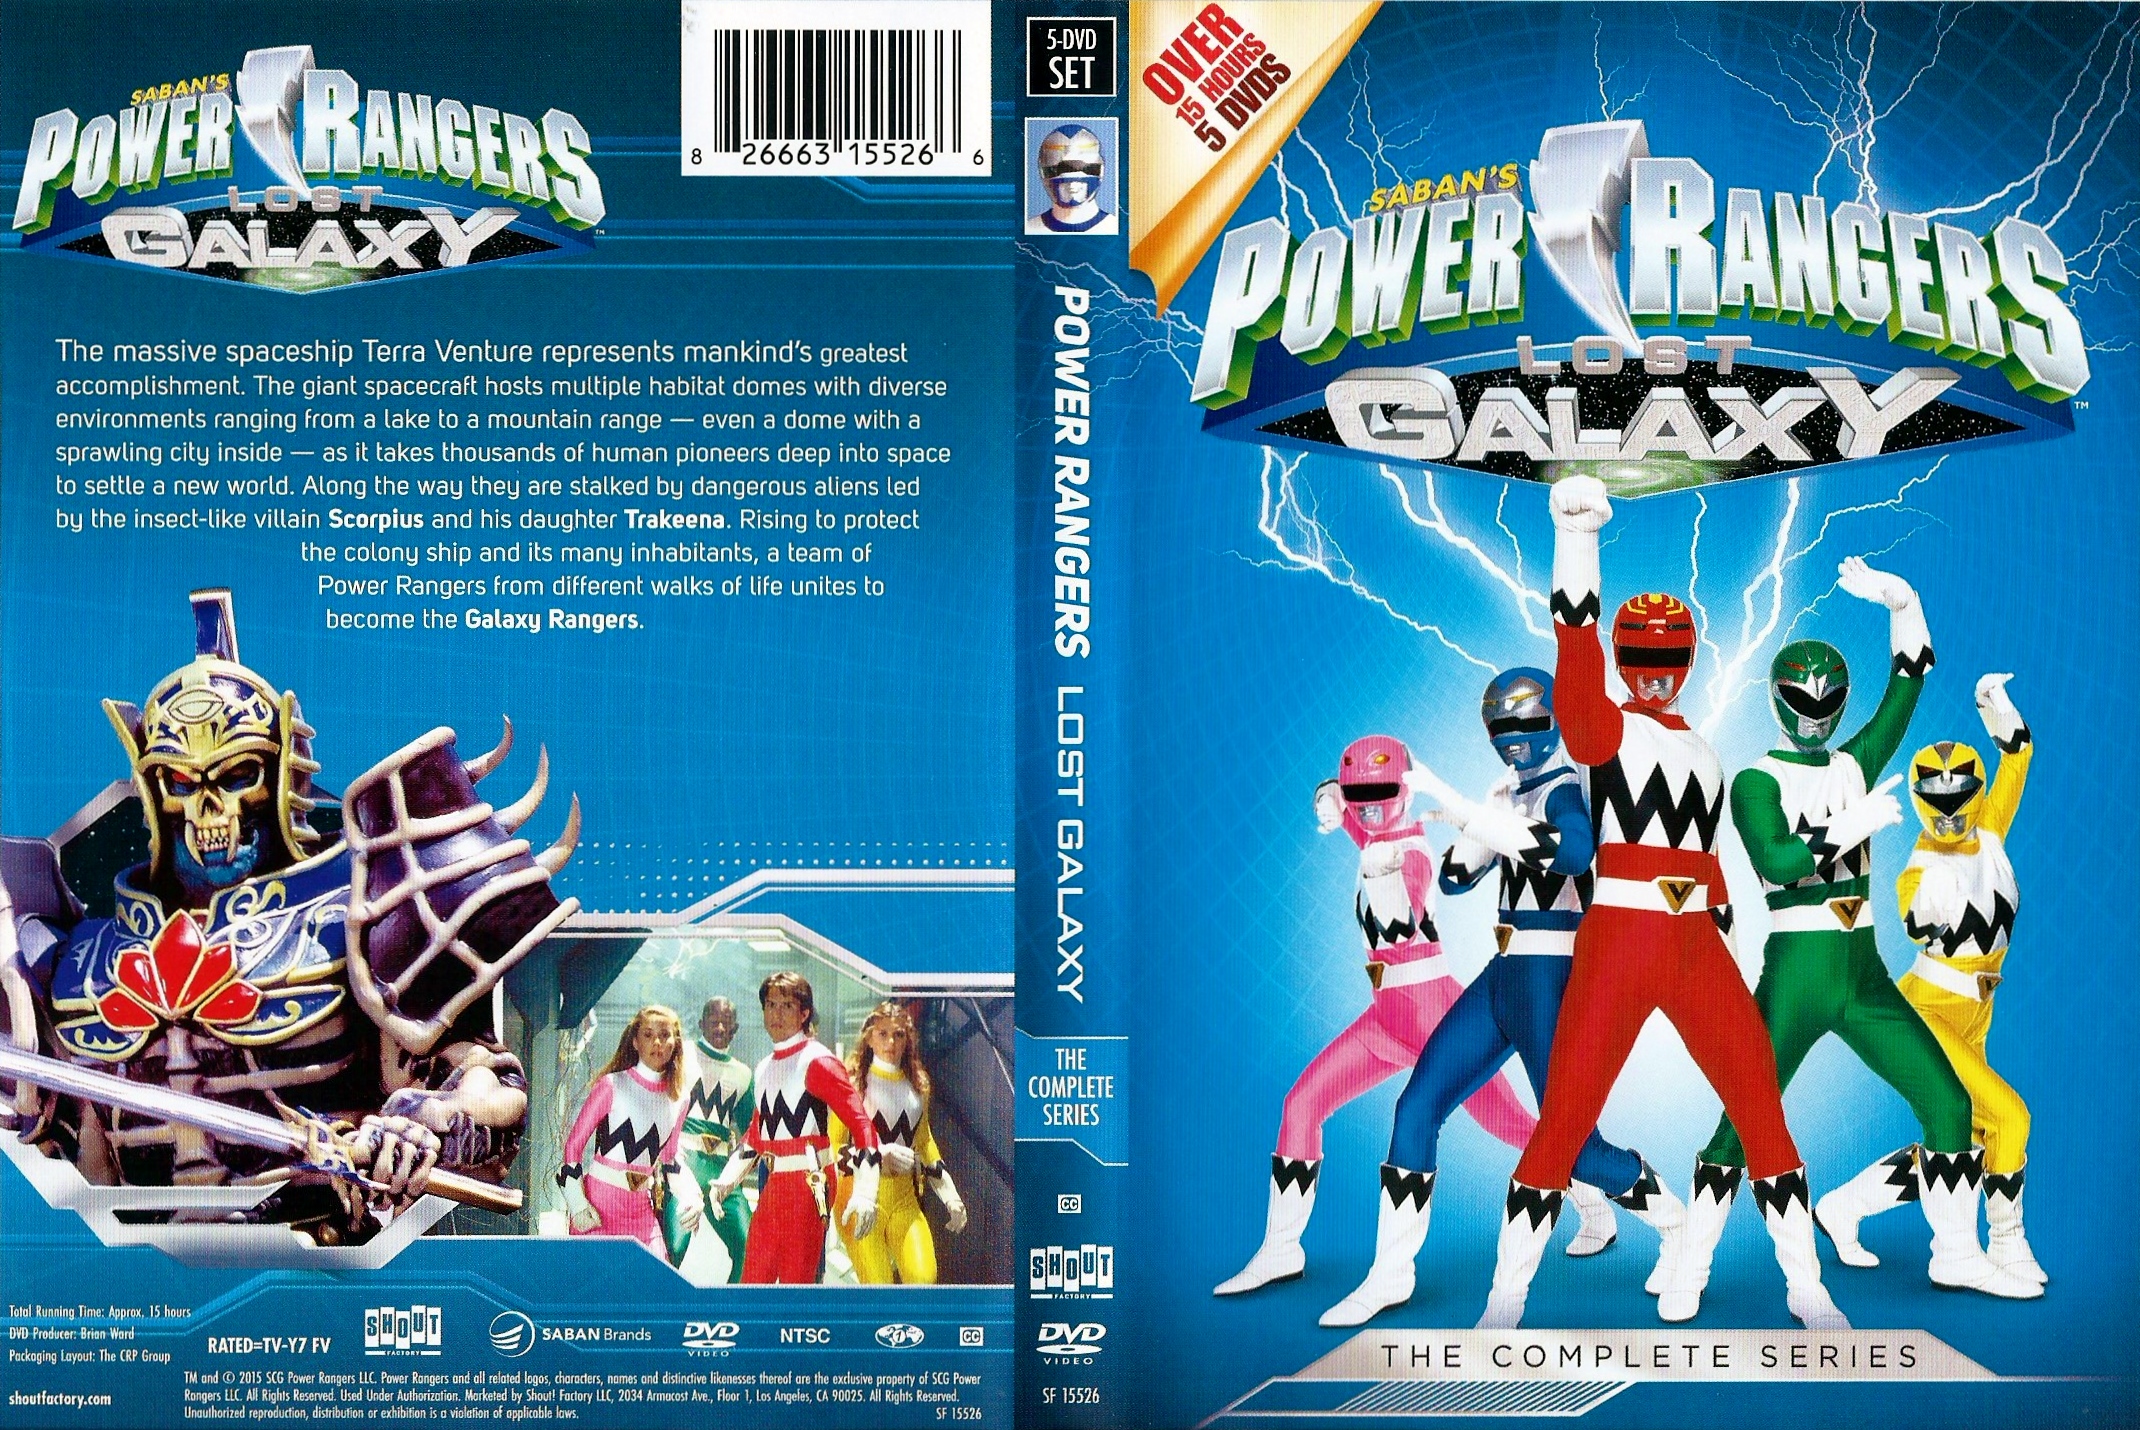 Power Rangers:Lost Galaxy The Complete Series (1999) - front back.